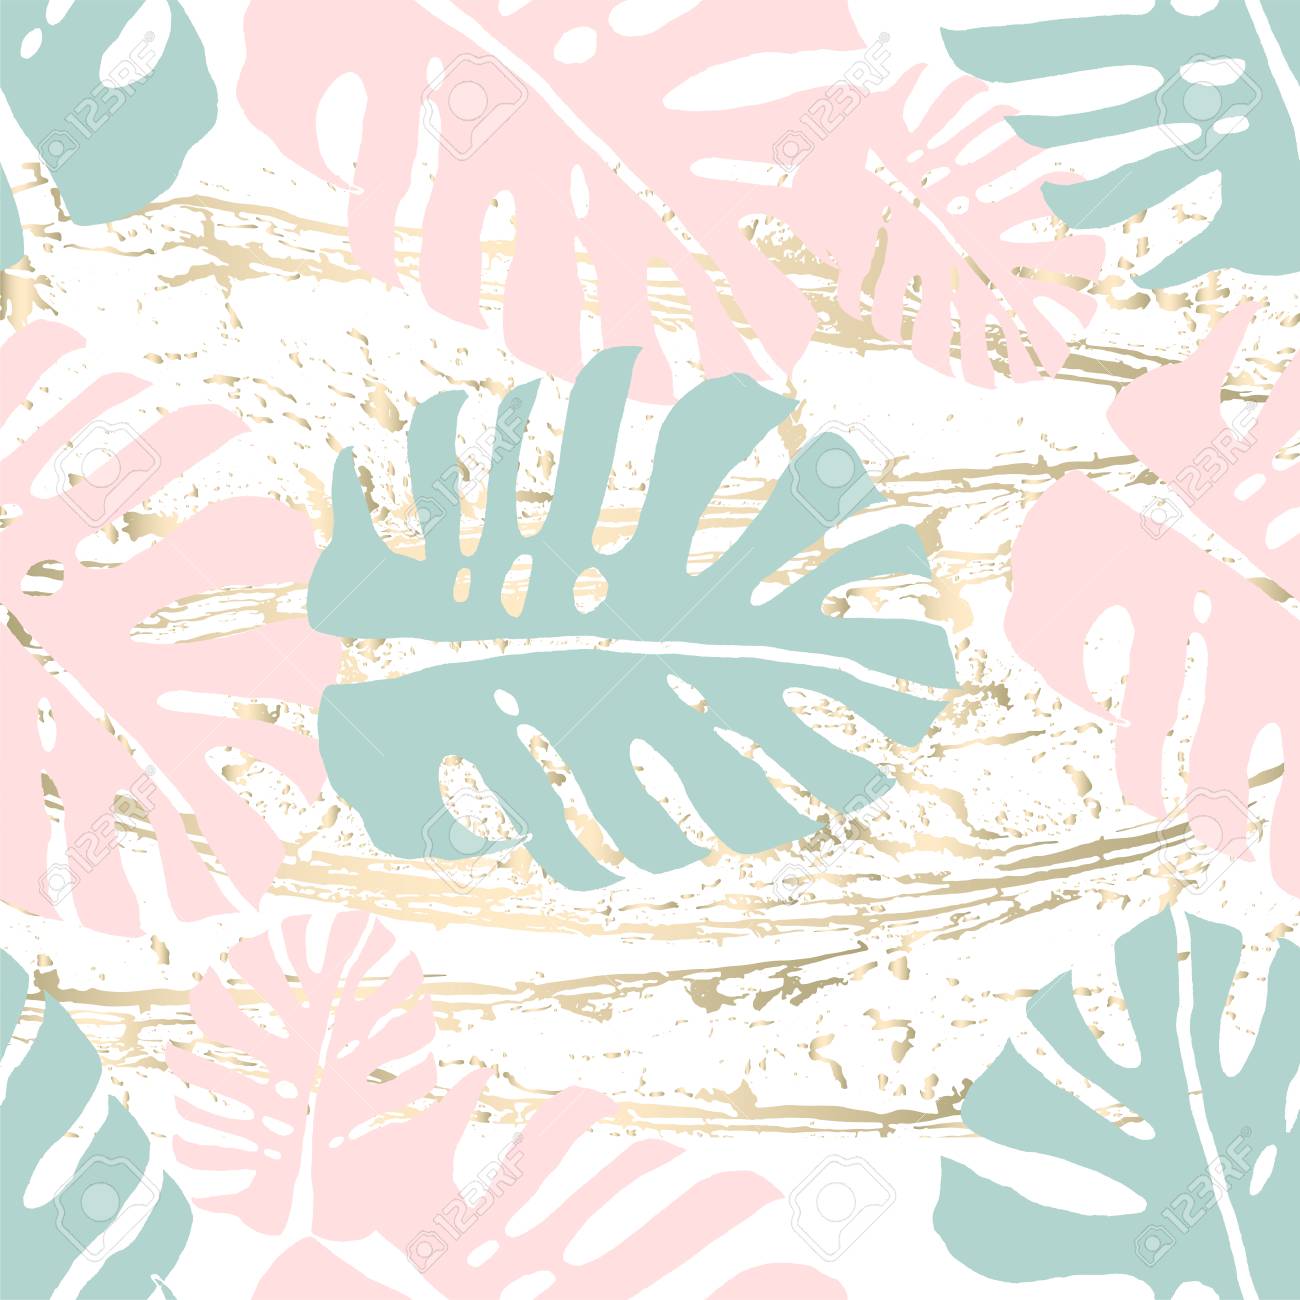 Tropical Worn Floral Pastel Pattern With Monstera Palm Leaves